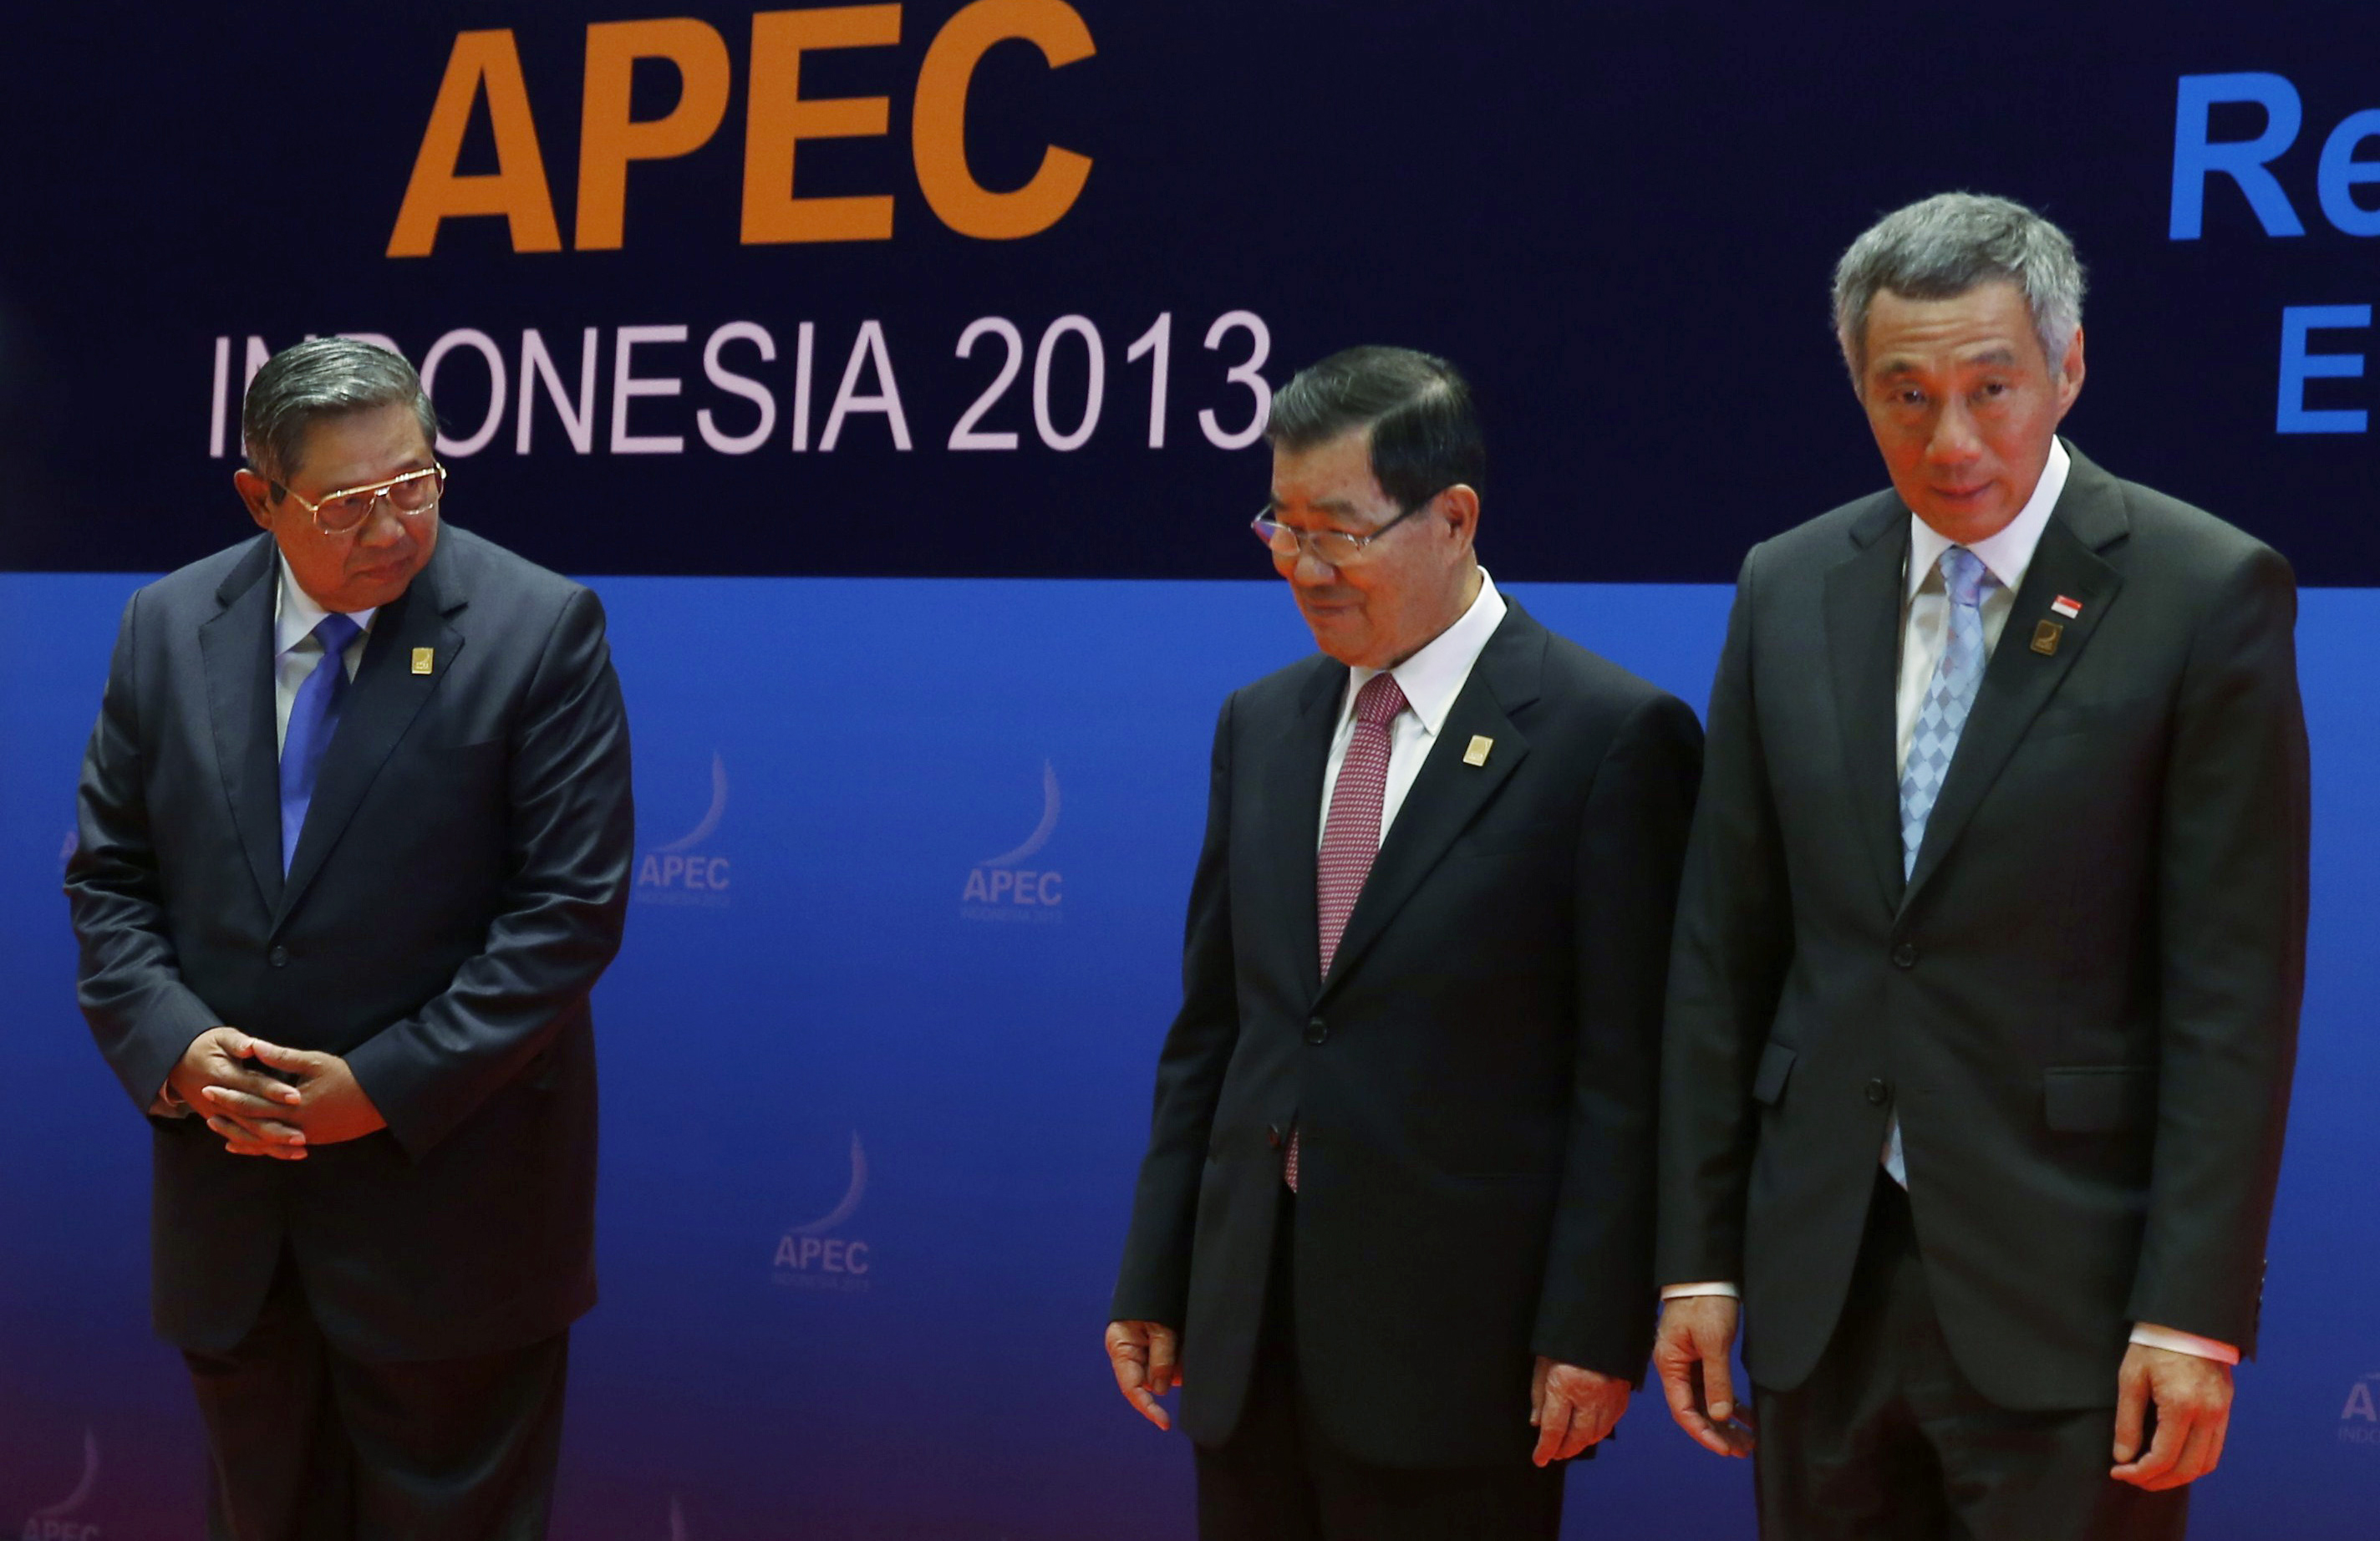 Taiwan's former Vice President Vincent Siew attends Apec with Indonesian President Susilo Bambang Yudhoyono and Singapore’s Prime Minister Lee Hsien Loong at the Apec forum in Bali. Photo: AP